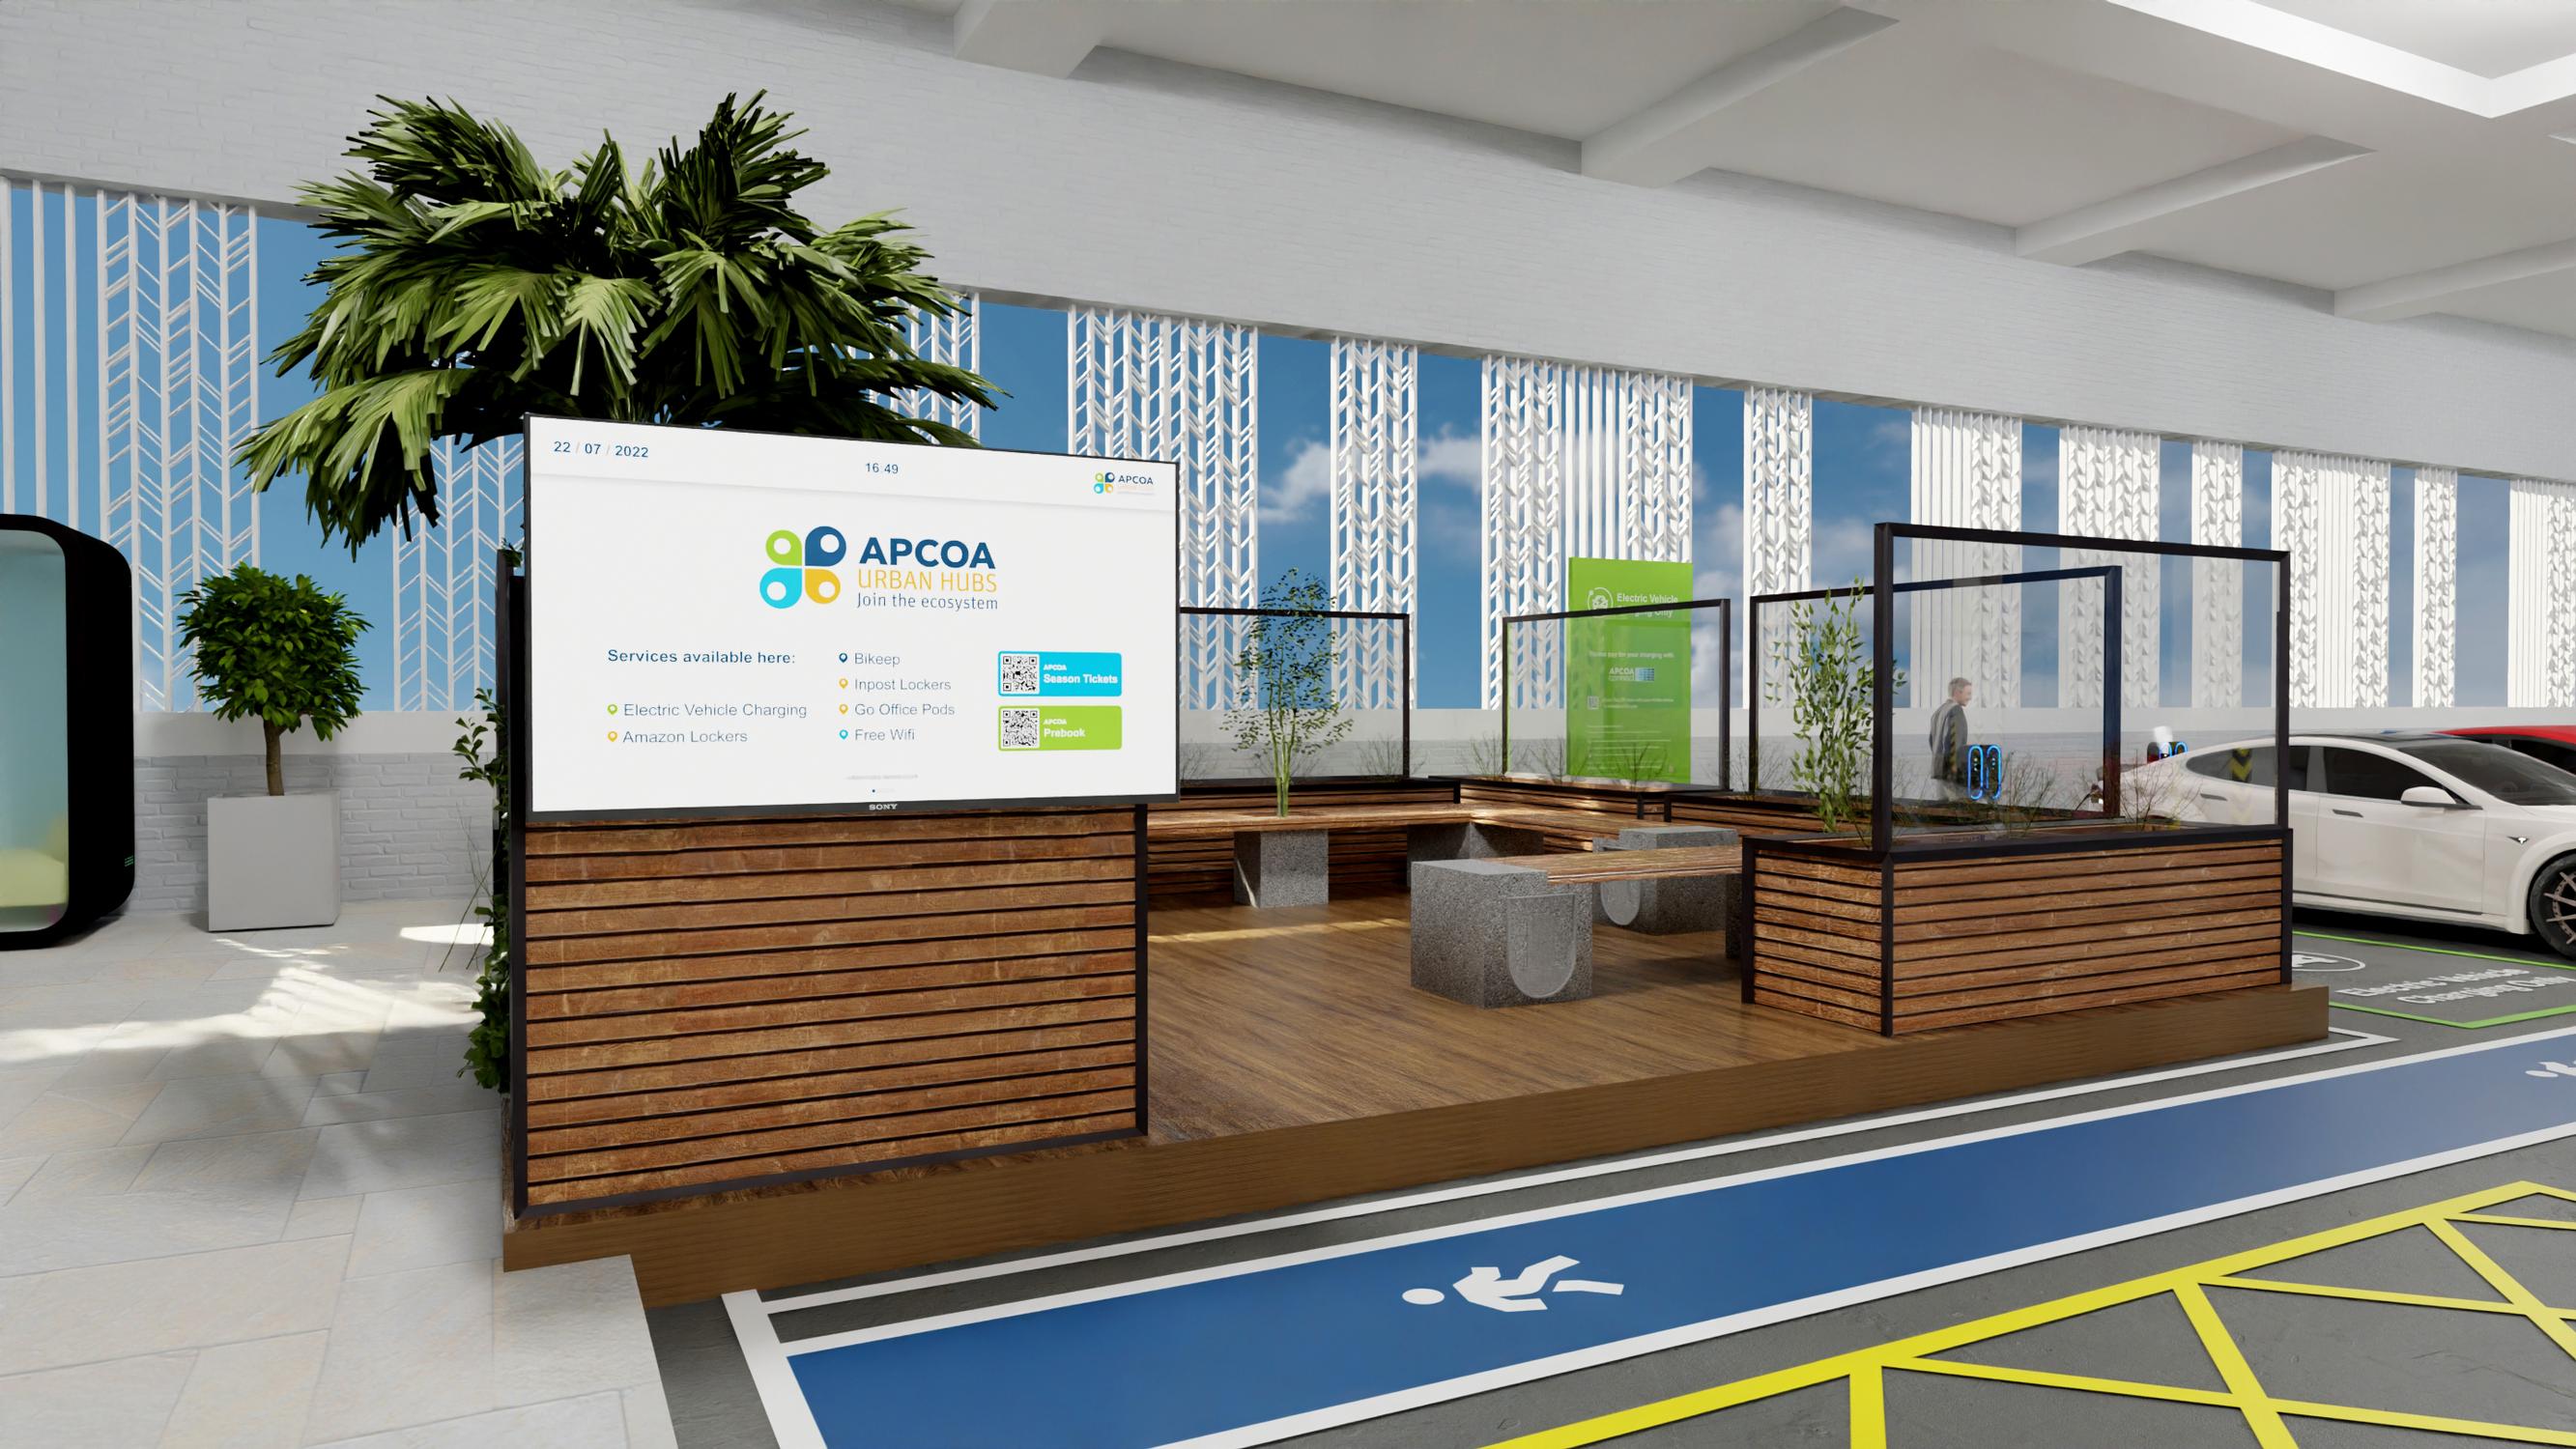 APCOA is championing the creation of mobility hubs in car parks